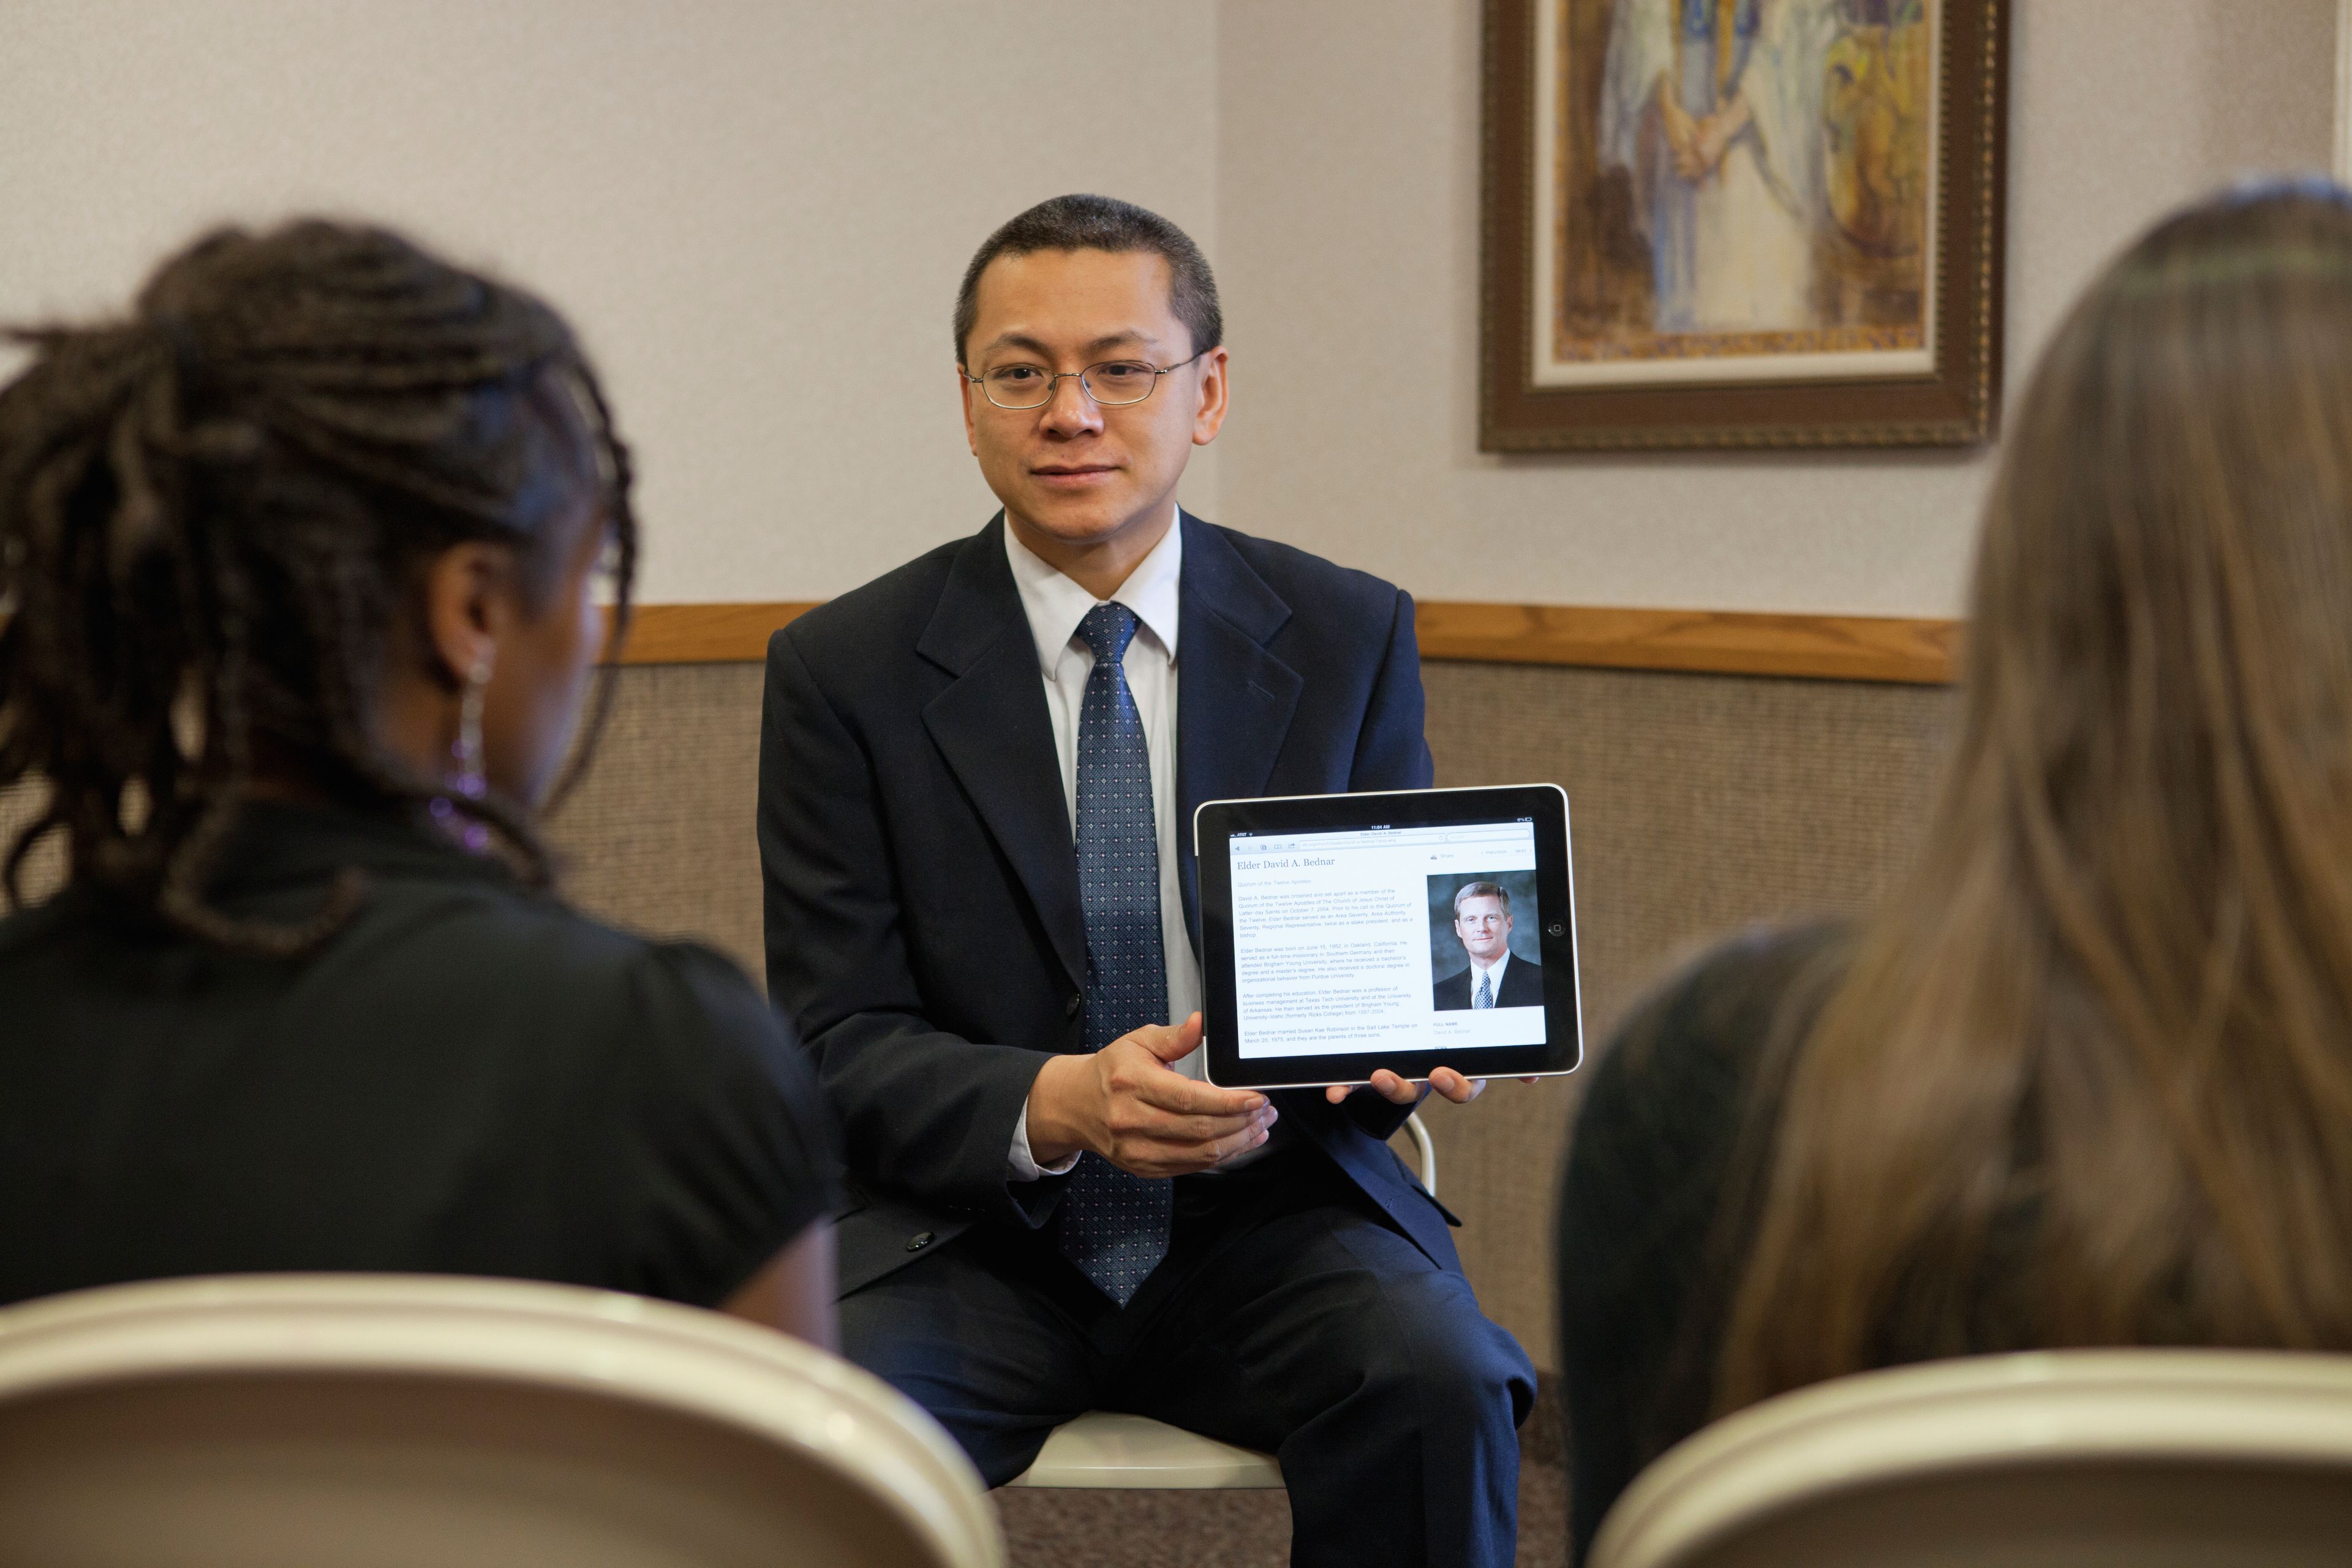 A teacher sits in front of his class and uses a tablet to show his students a talk by Elder Bednar.